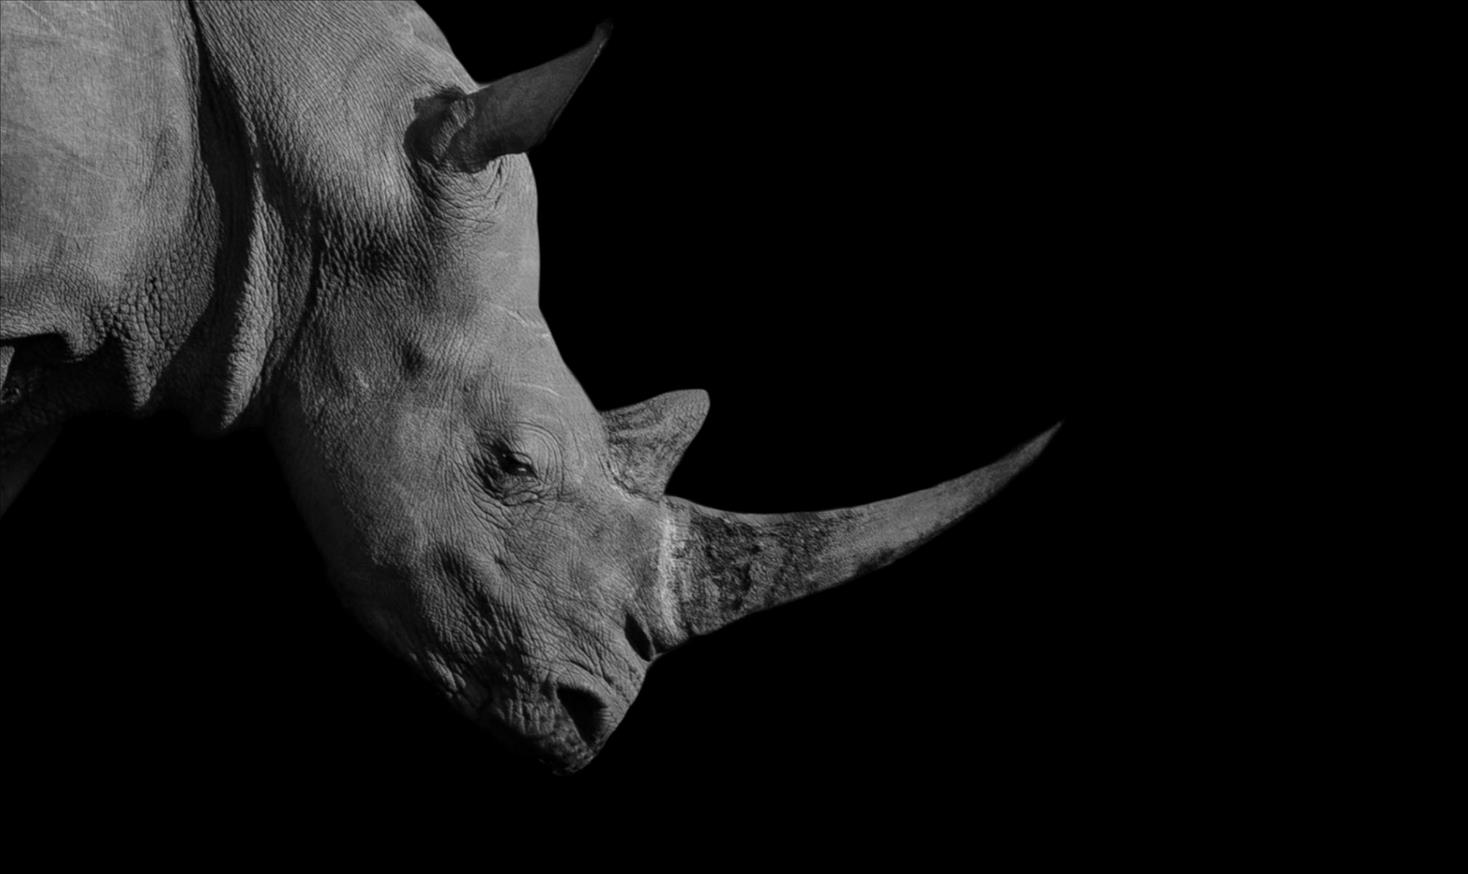 Rhino Horn Consumers Reveal Why A Legal Trade Alone Won't Save Rhinos